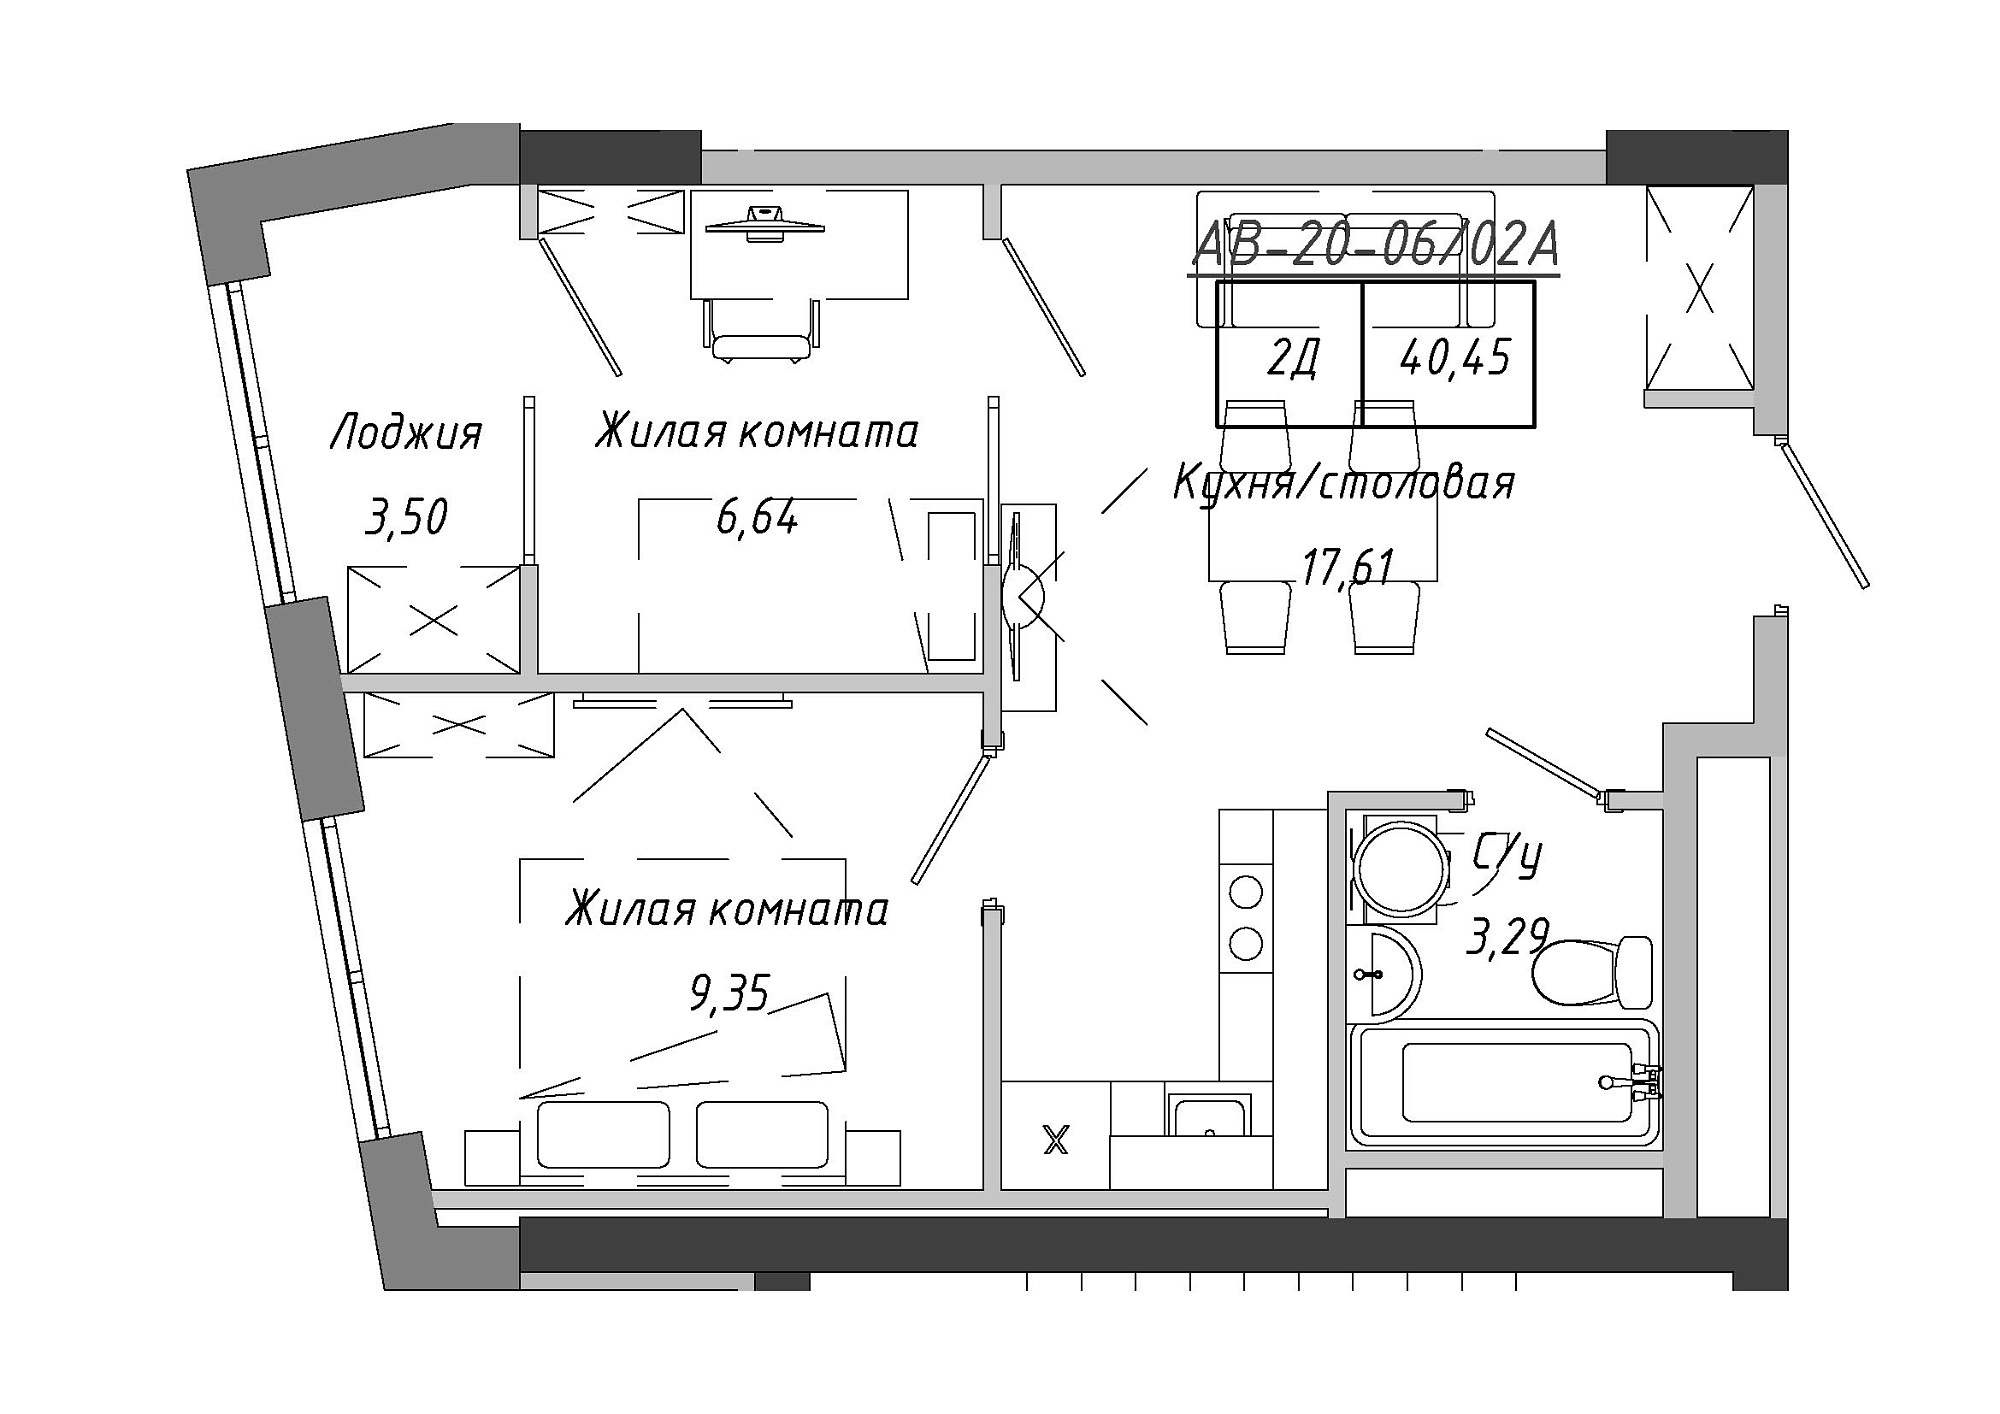 Planning 2-rm flats area 41.9m2, AB-20-06/0002а.